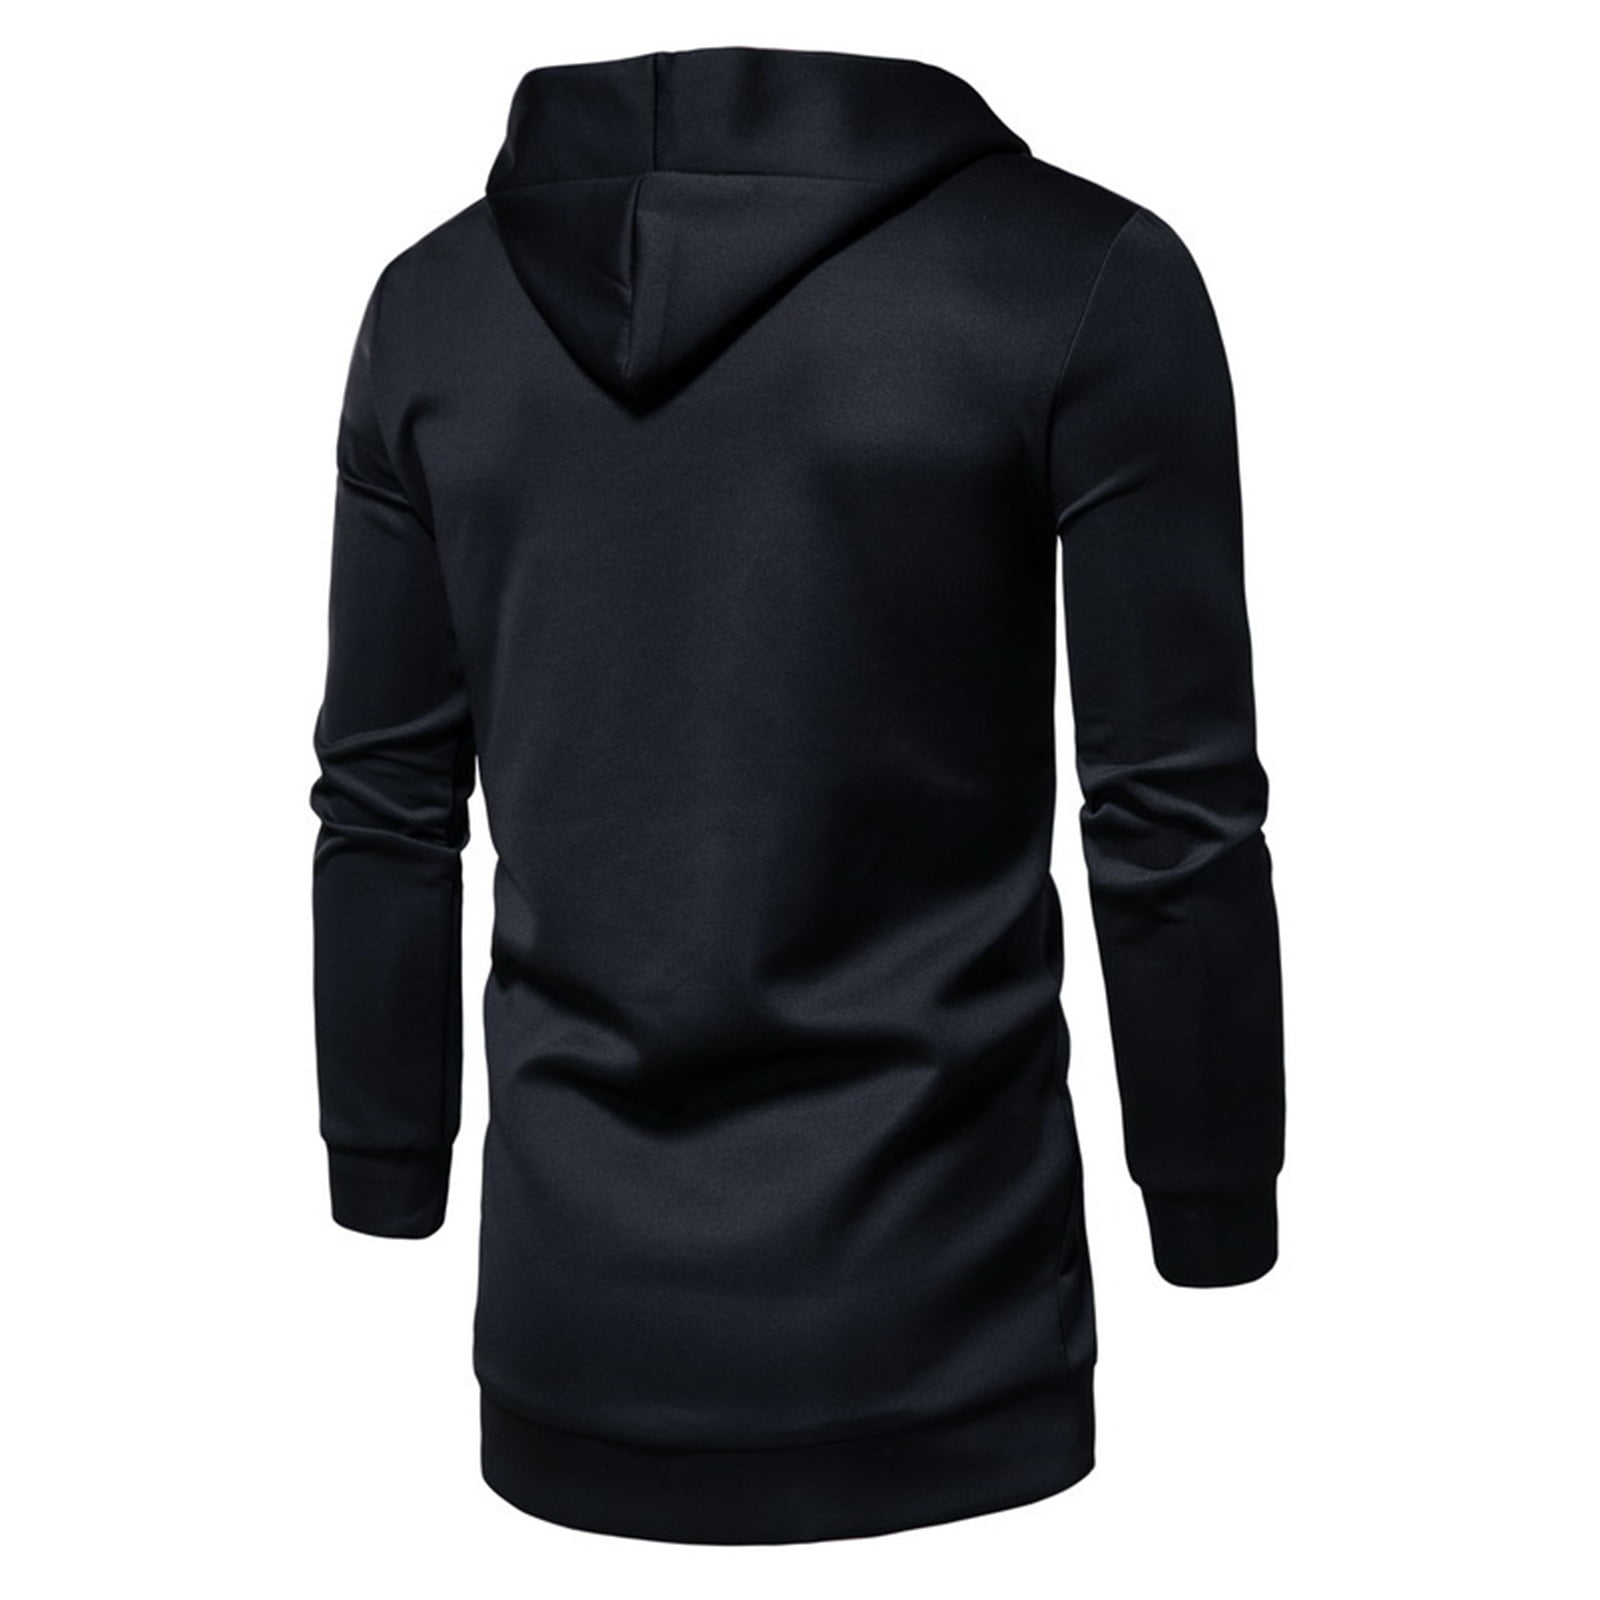 wofedyo hoodies for men men's autumn&winter solid color long sleeved ...